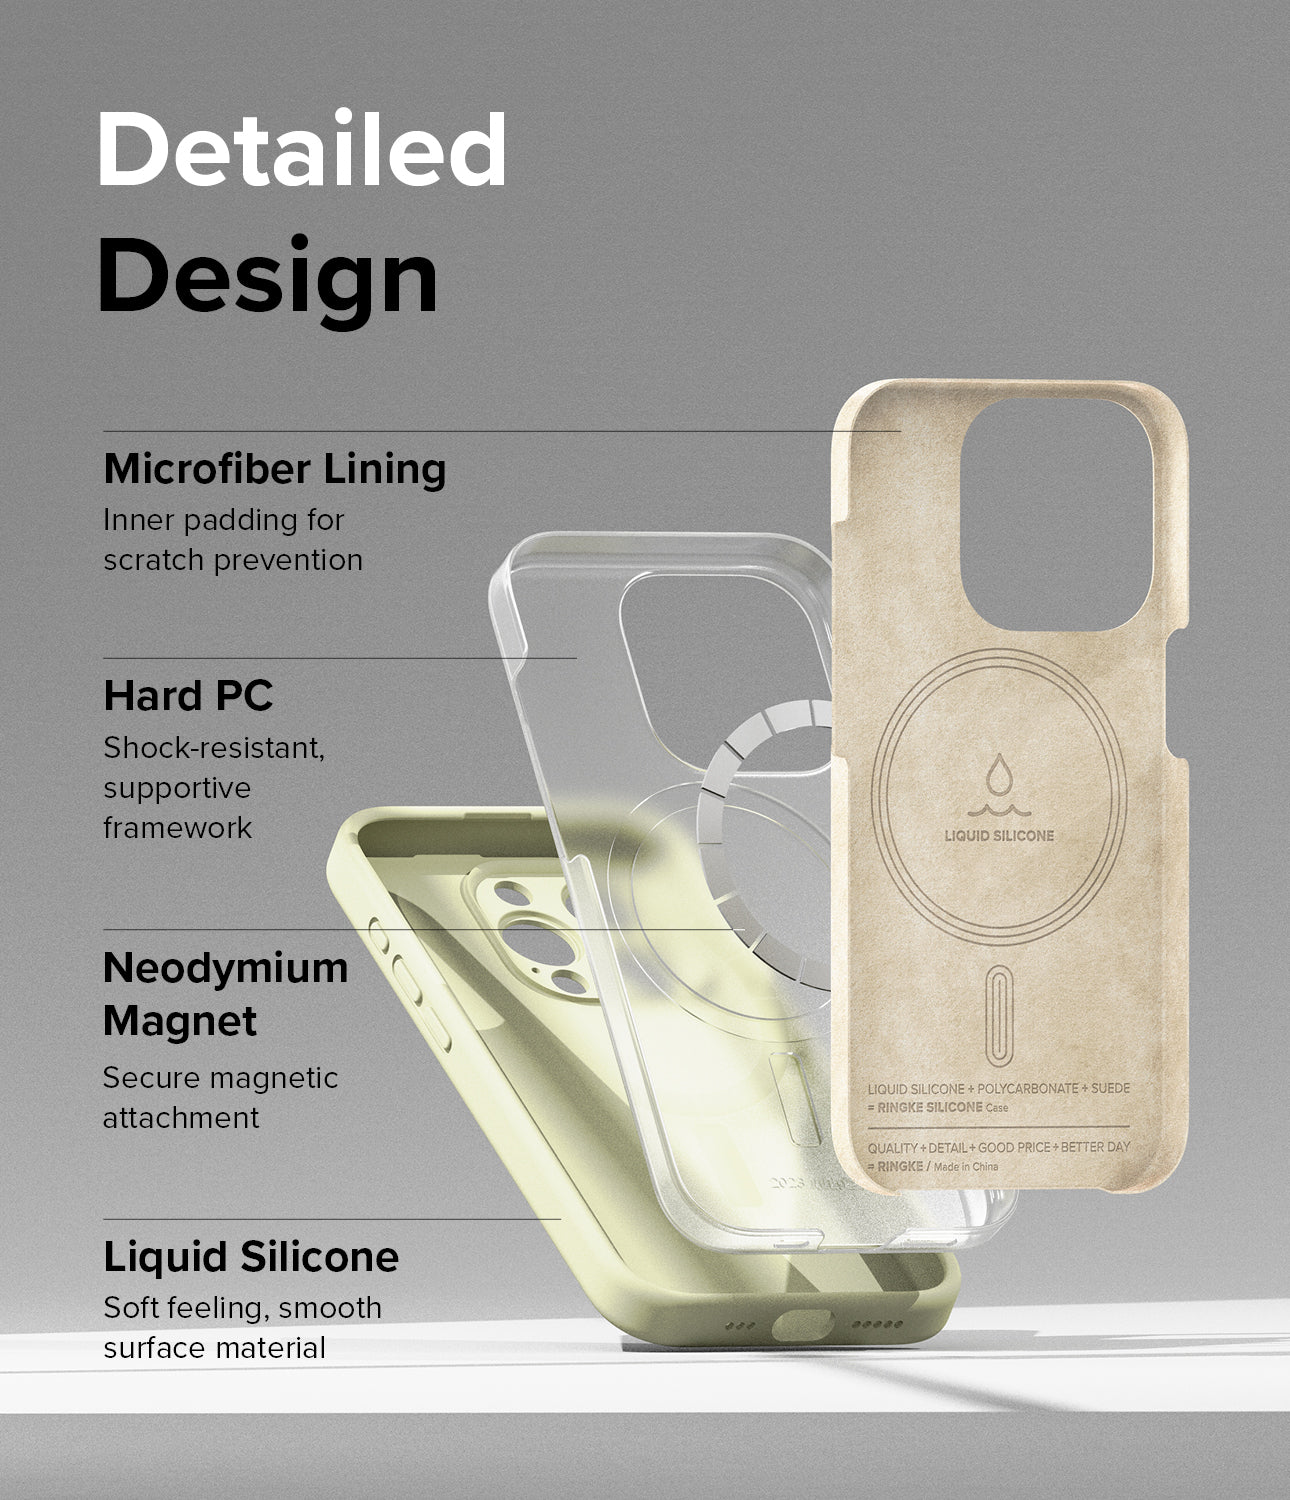 iPhone 15 Pro Case | Silicone Magnetic - Sunny Lime - Detailed Design. Inner padding for scratch prevention with Microfiber Lining. Shock-resistant, supportive framework with Hard PC. Neodymium Magnet to secure magnetic attachment. Soft feeling, smooth surface Liquid Silicone.